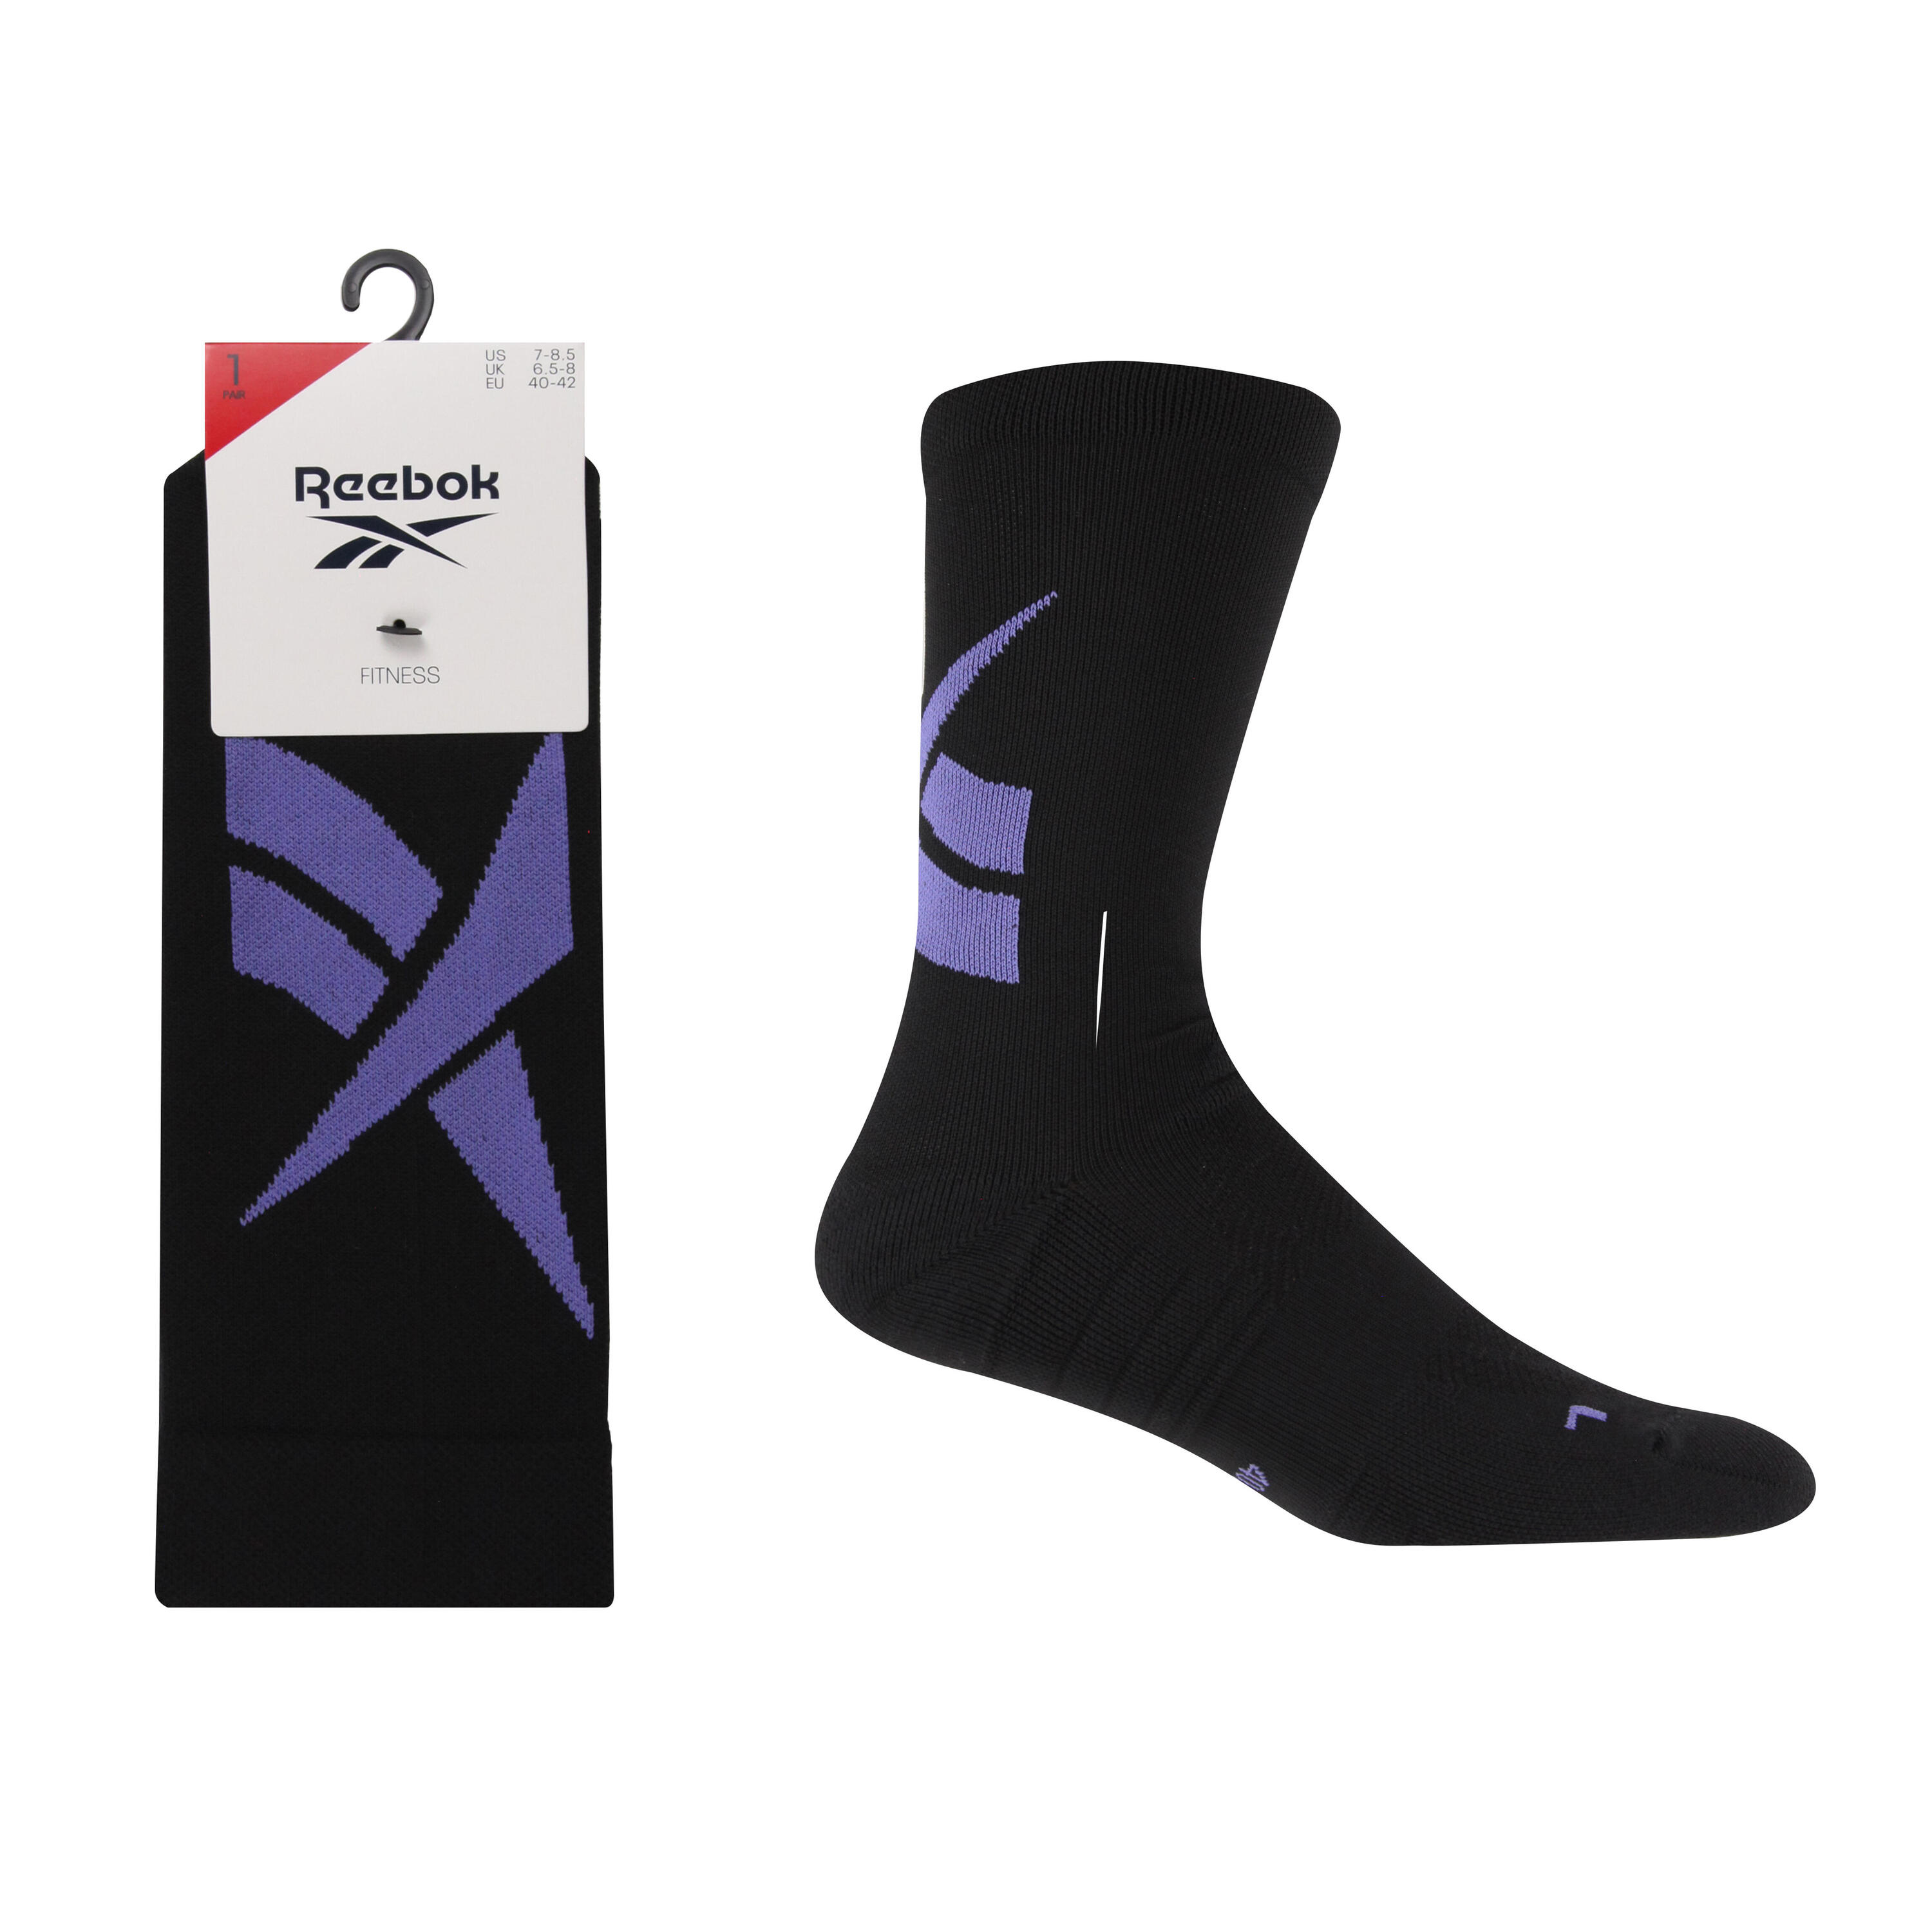 REEBOK 1 Pack Fitness Socks With Full Elastic Compession, Mesh Panels and Arch Support